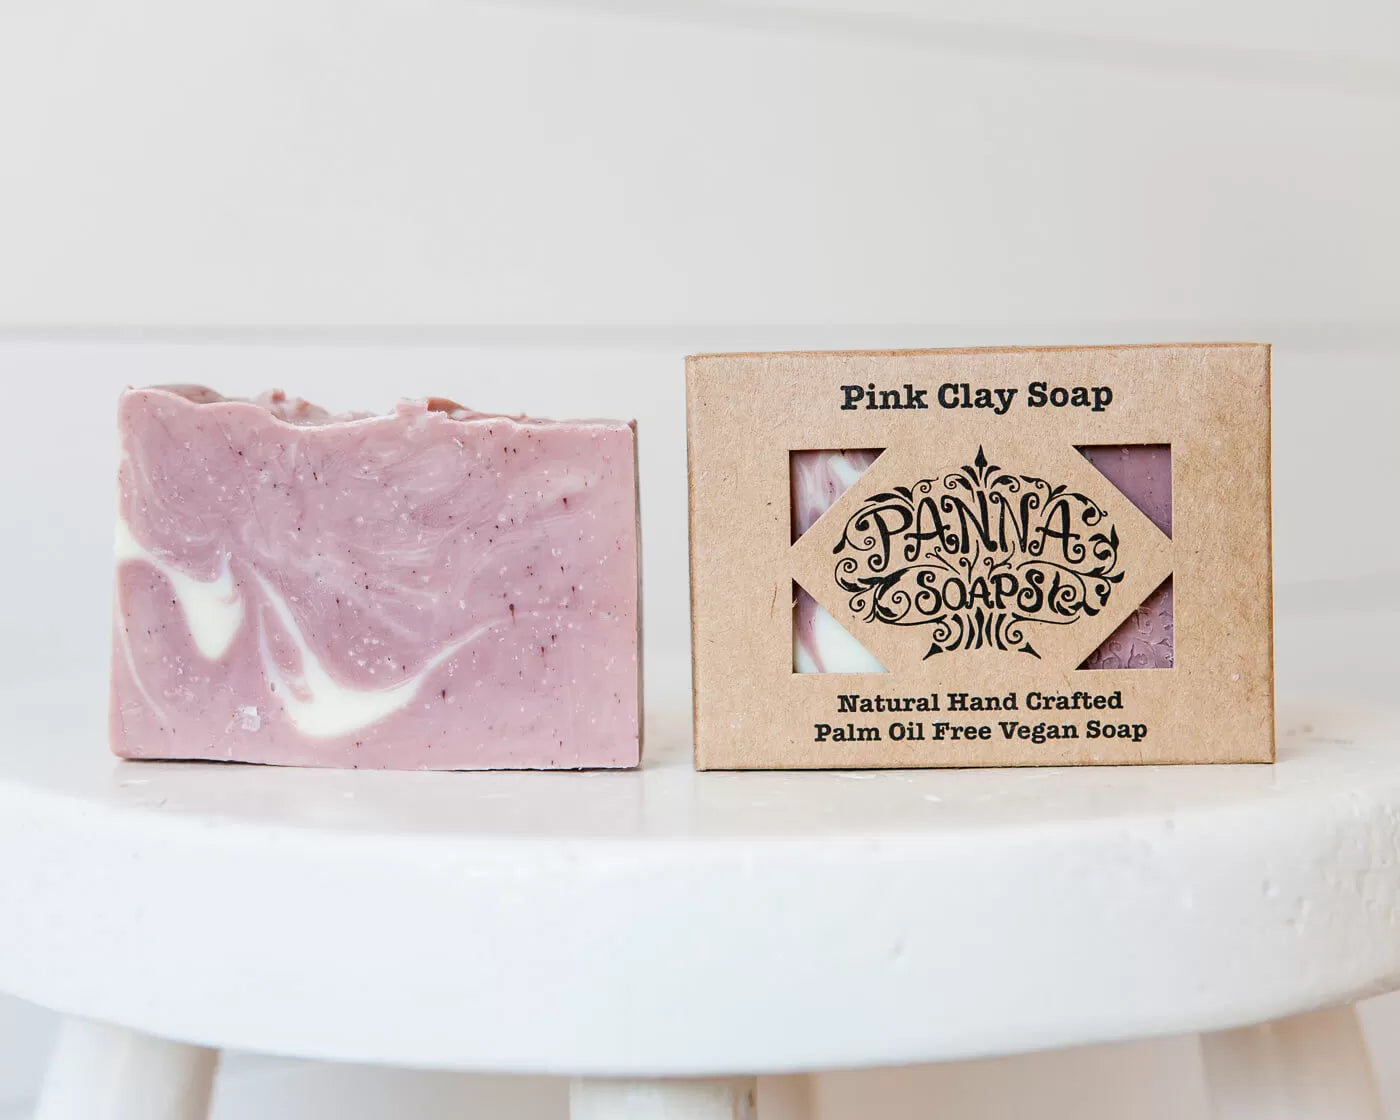 Panna Soap- Natural Handcrafted -Palm Oil Free-Vegan Soap